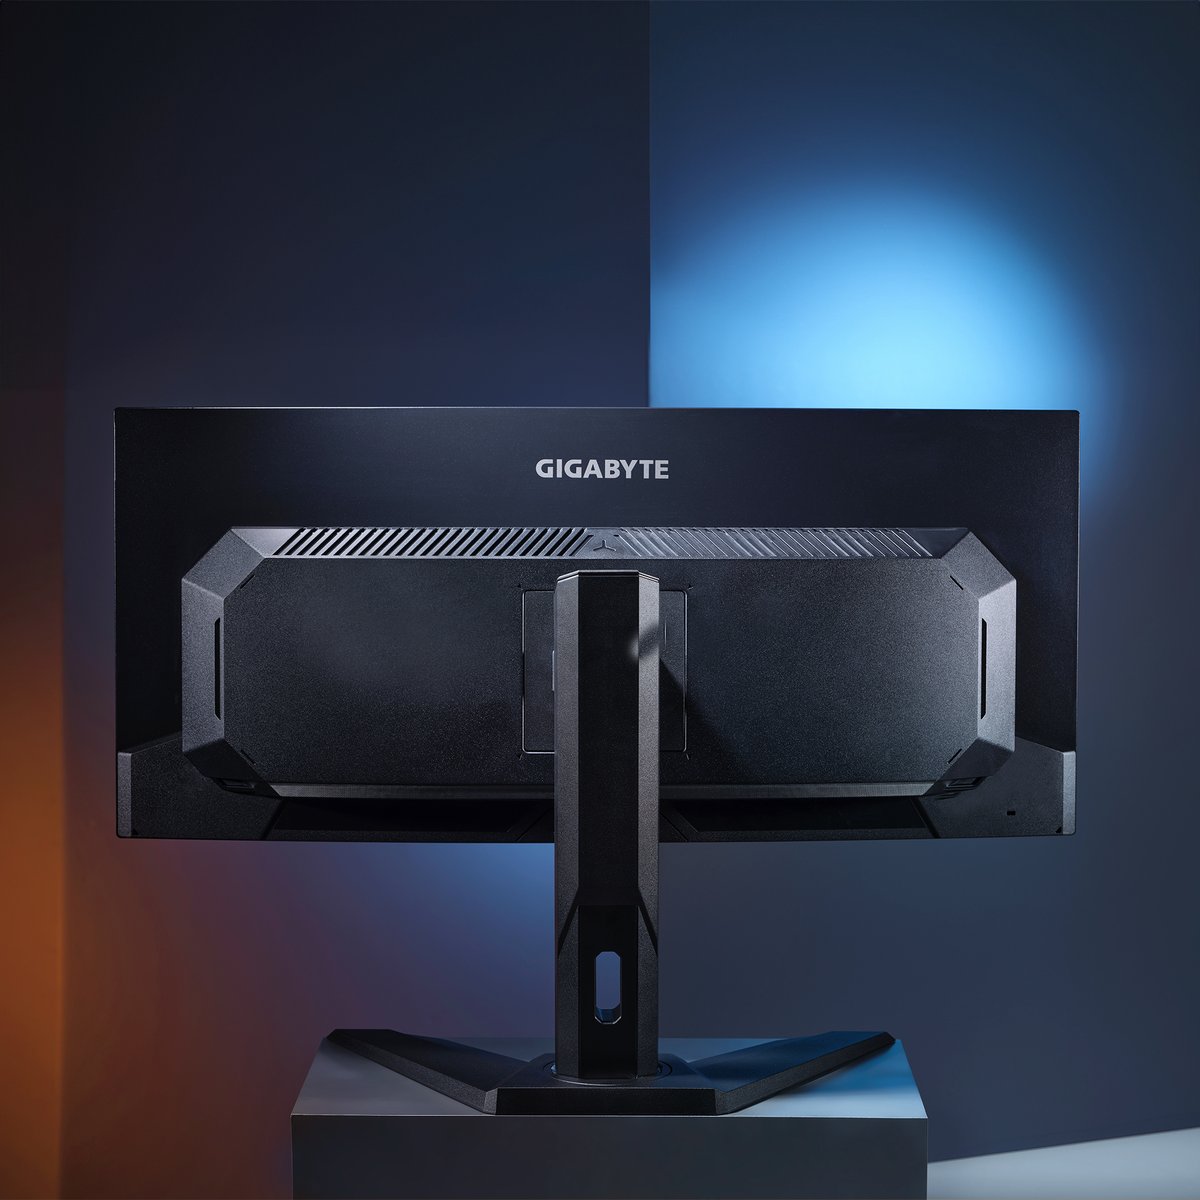 Ready to experience the next level of gaming visuals? 🤩✨ The GIGABYTE MO34WQC curved gaming monitor enhances your setup with stunning OLED technology, balancing immersive gameplay and productivity. #GIGABYTE #AORUS #OLEDMonitor #Winnersneversettle #MO34WQC